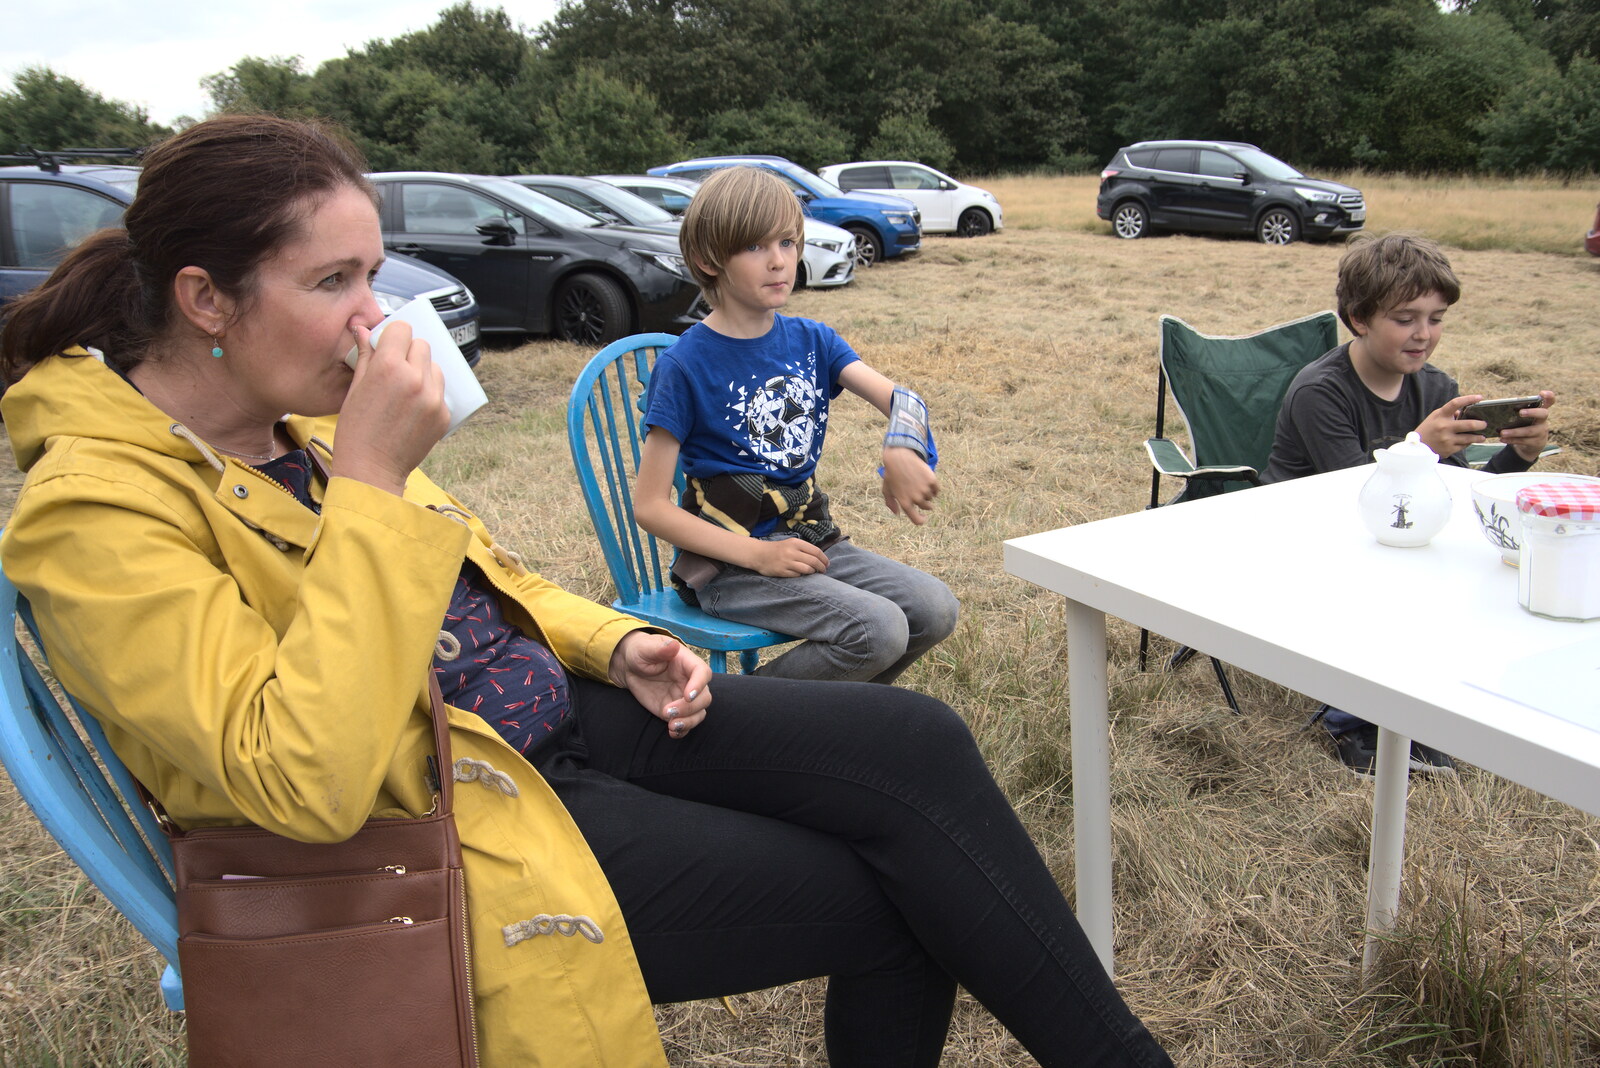 We stop for a drink from An Open Day at the Windmill, Billingford, Norfolk - 21st August 2021